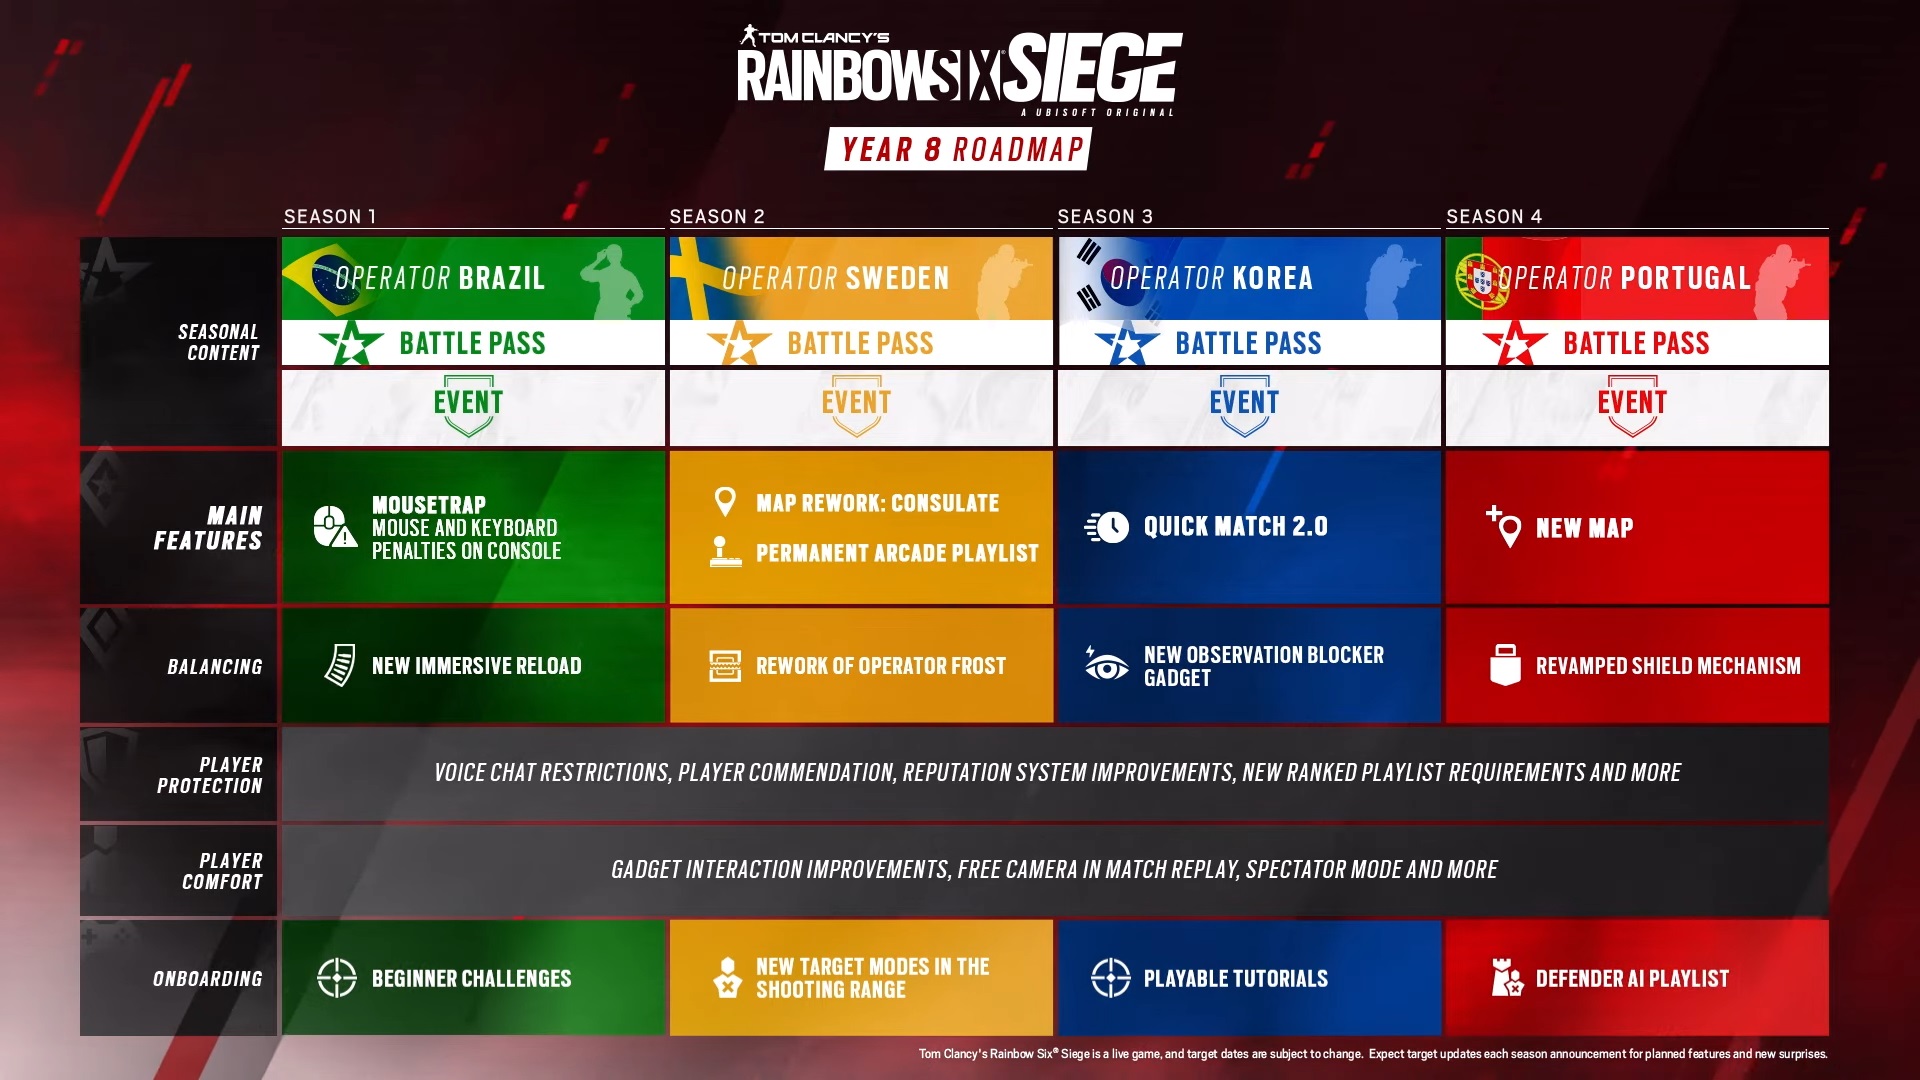 Rainbow Six Siege is revamping riot shields and overhauling the new player experience in 2023